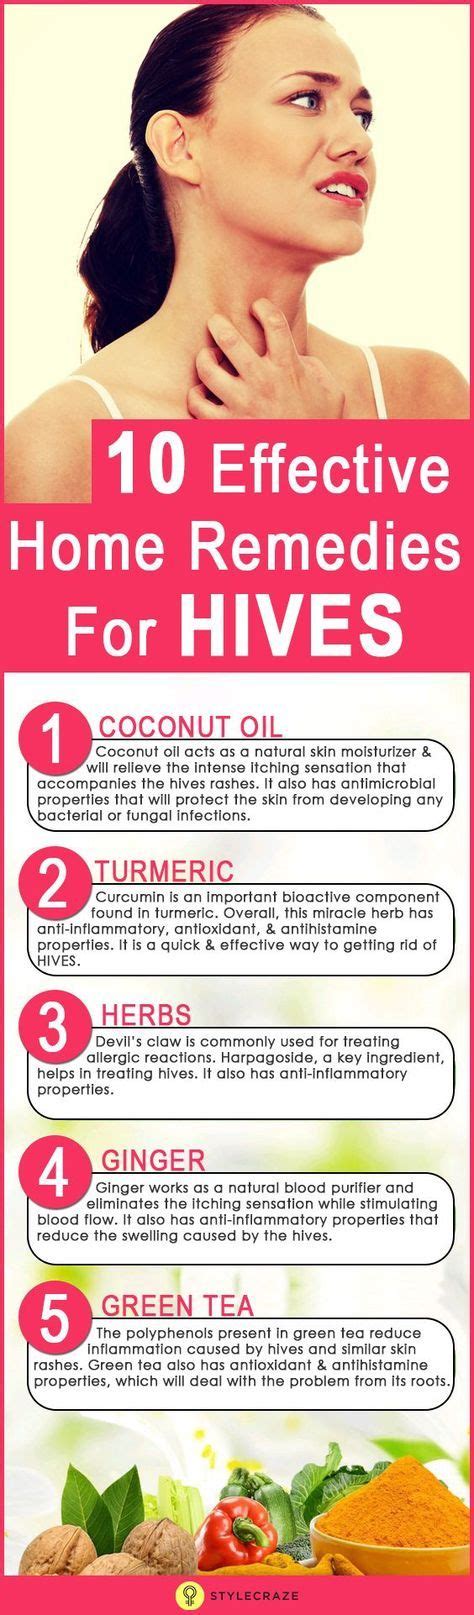 How To Get Rid Of Hives Home Remedies For Hives Hives Remedies